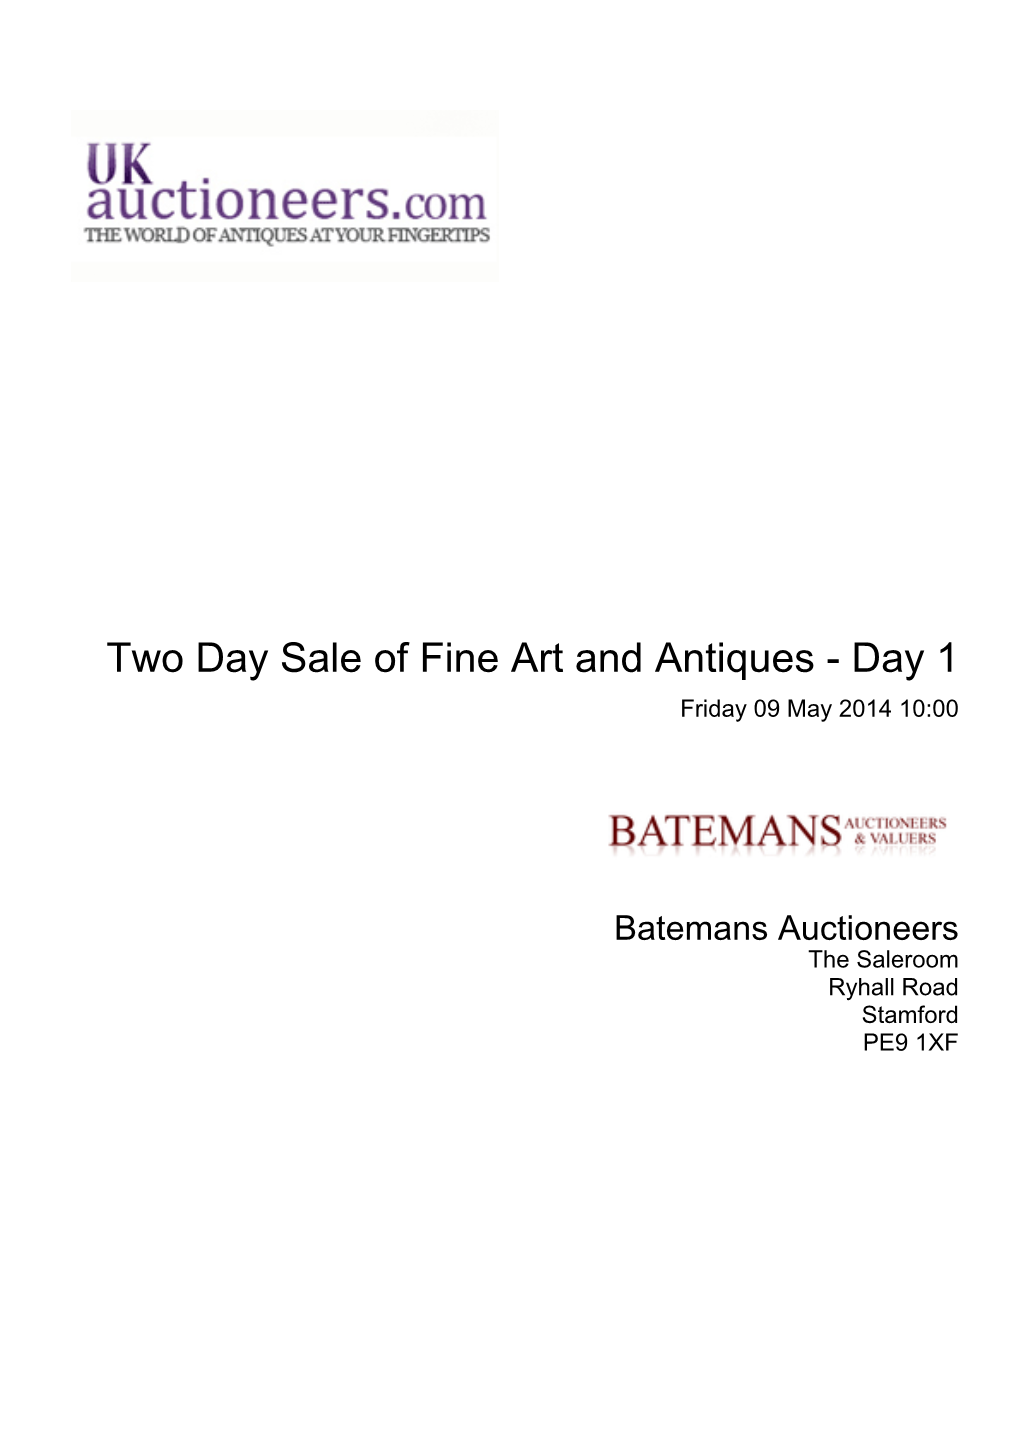 Two Day Sale of Fine Art and Antiques - Day 1 Friday 09 May 2014 10:00